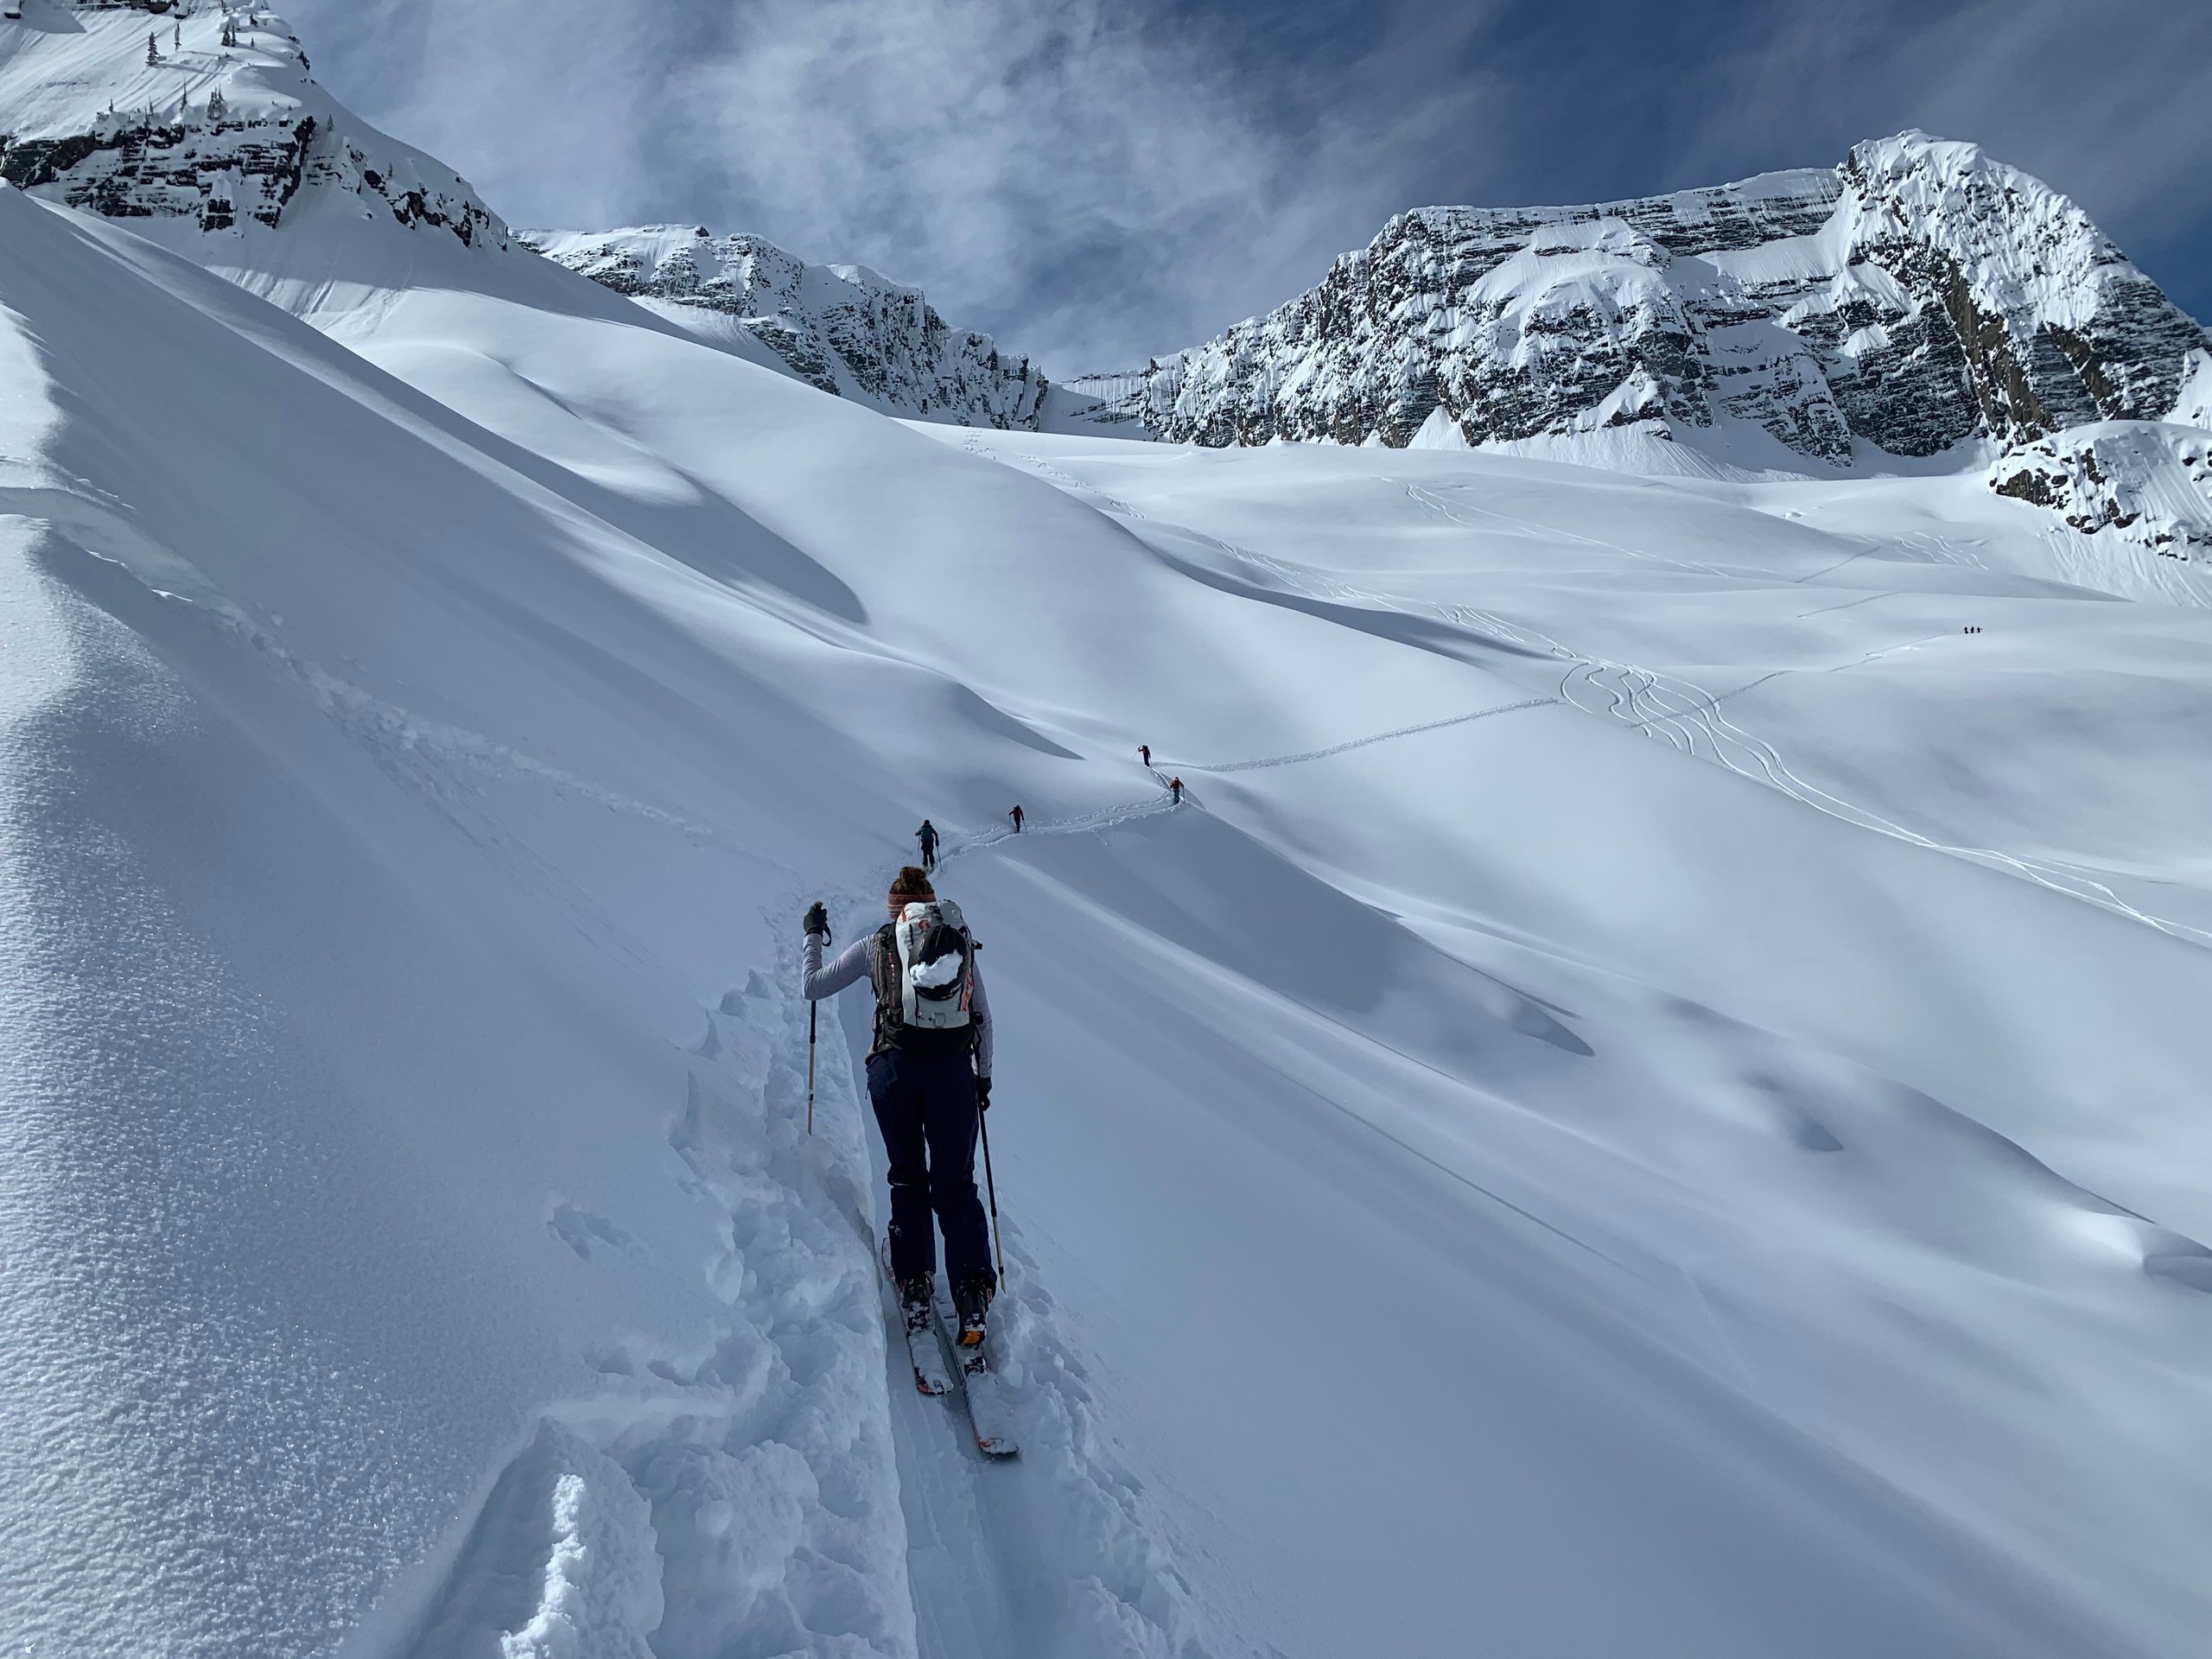 Backcountry Skiing at Rogers Pass 12